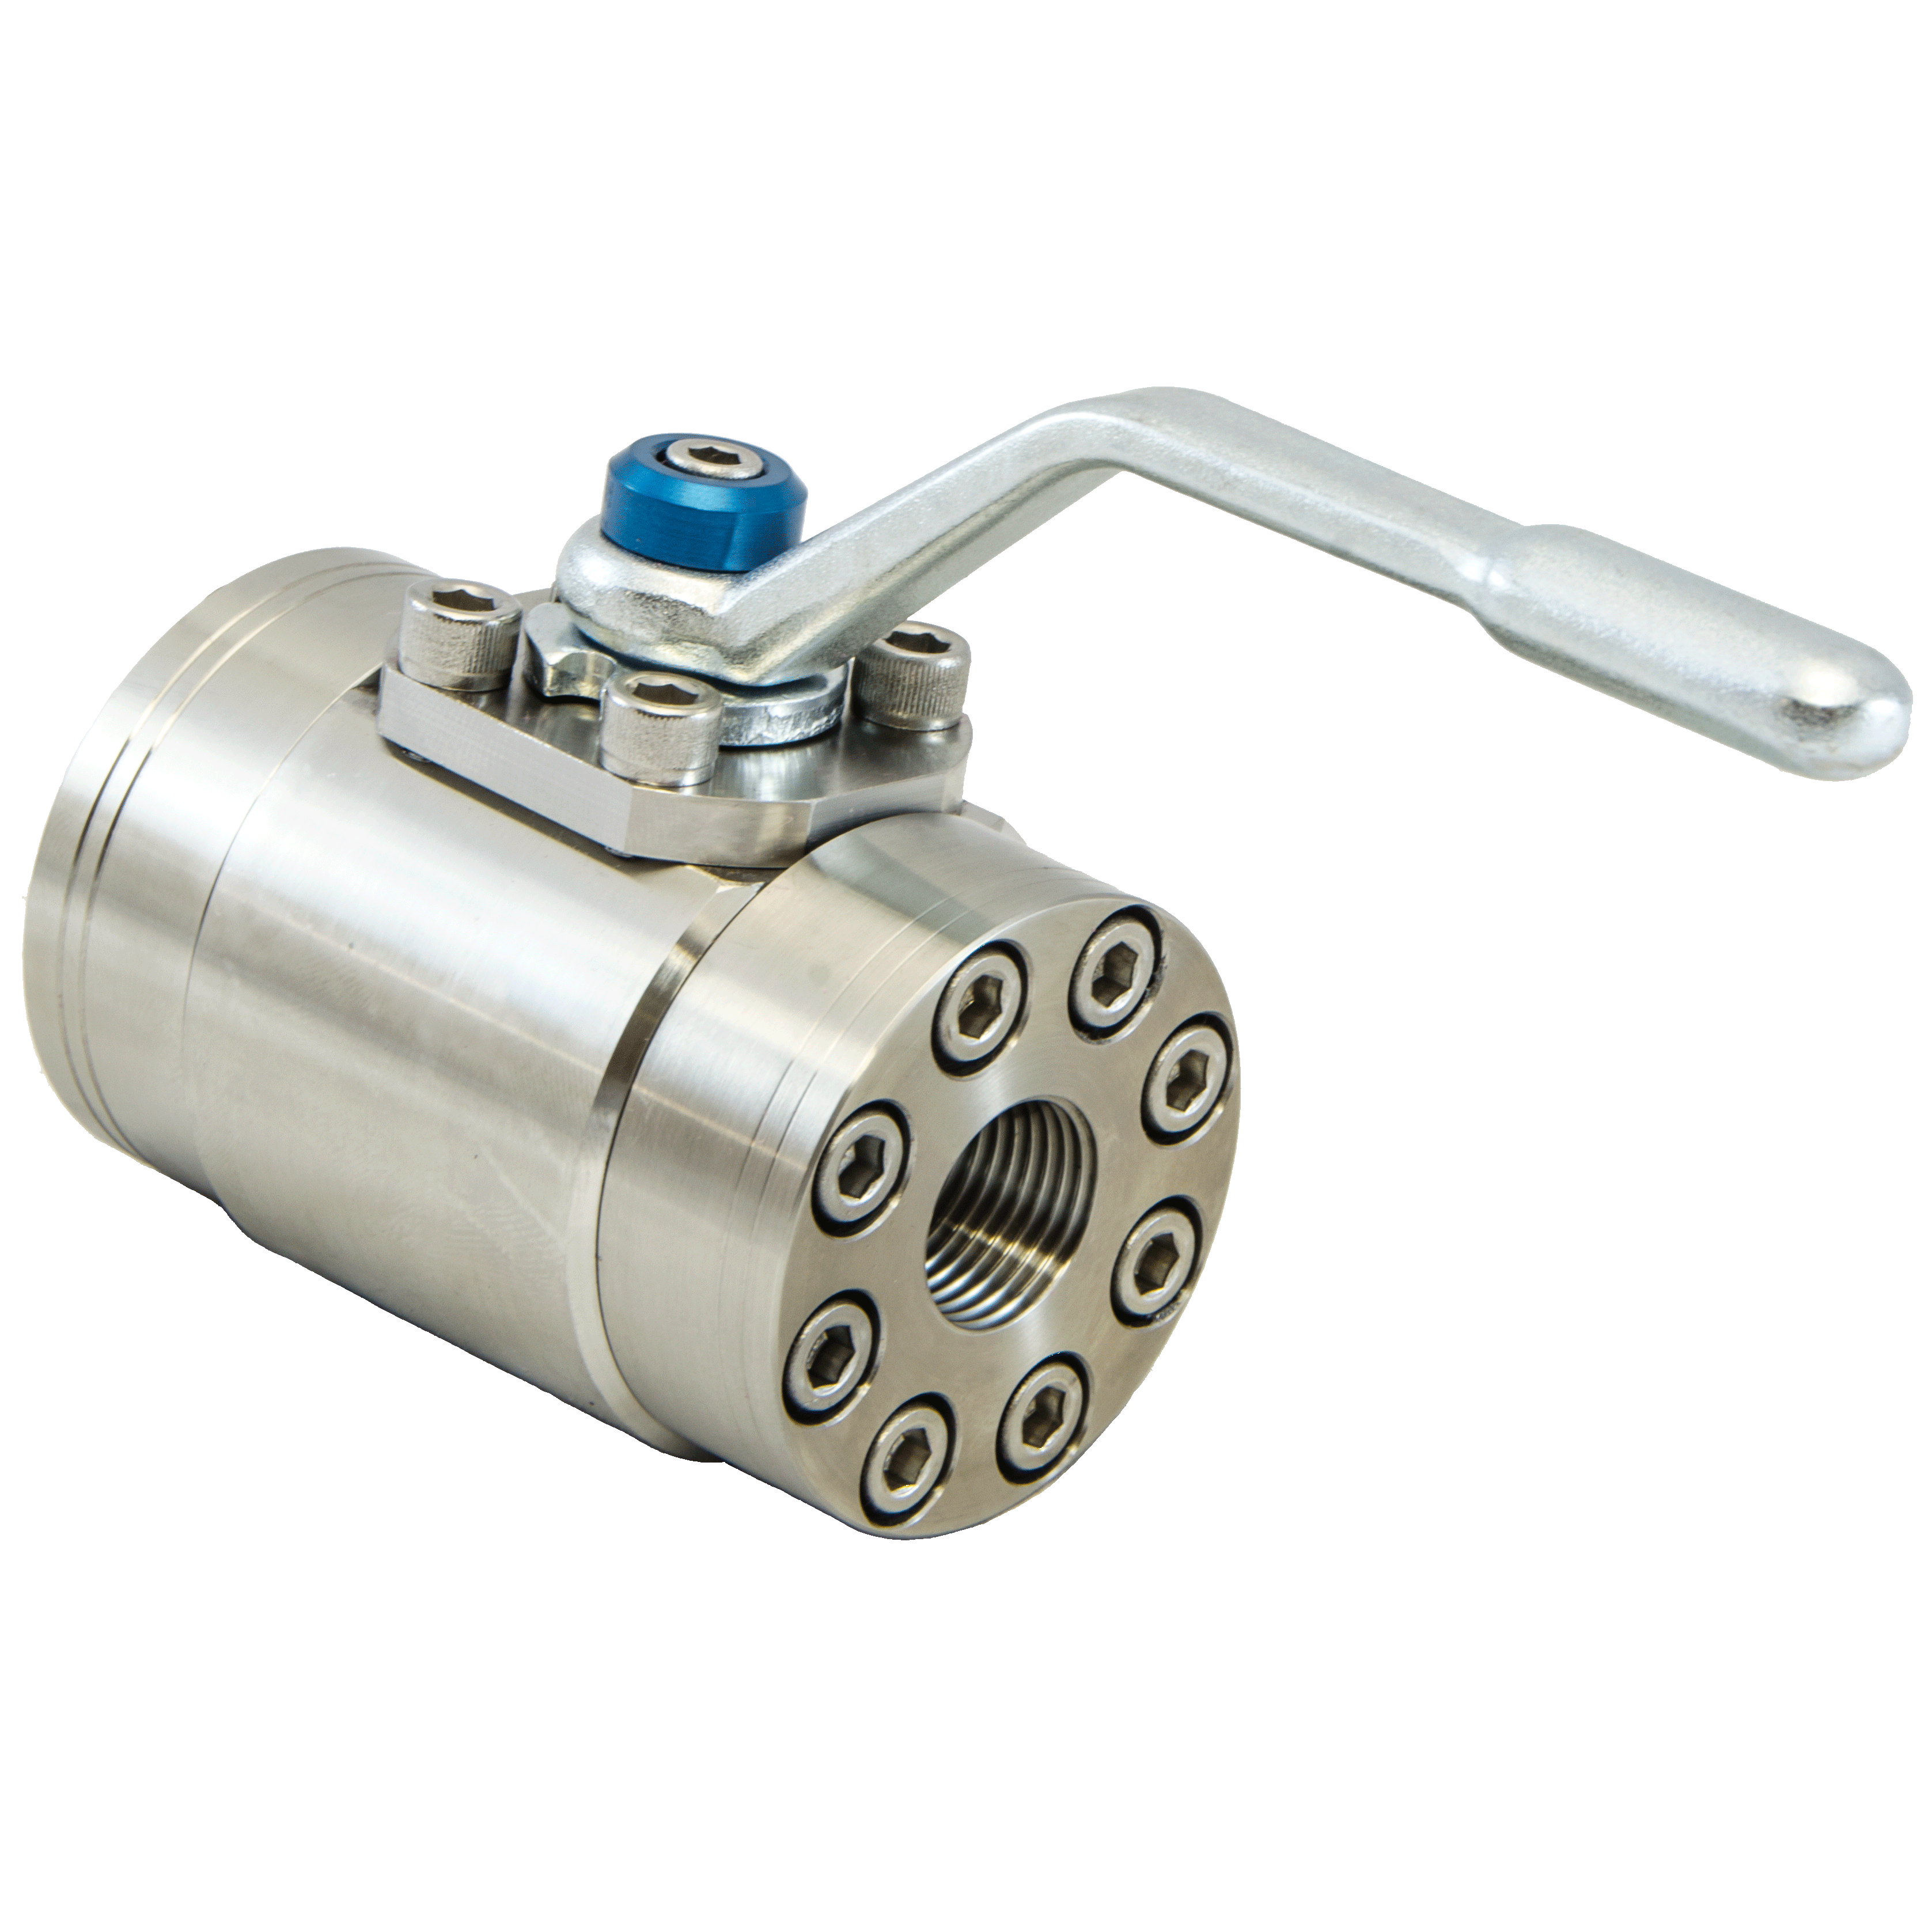 BVQG-1000N-2211 : DMIC Stainless Gas Ball Valve, 1 NPT, 316 Stainless Steel, 6000psi, Two-Way